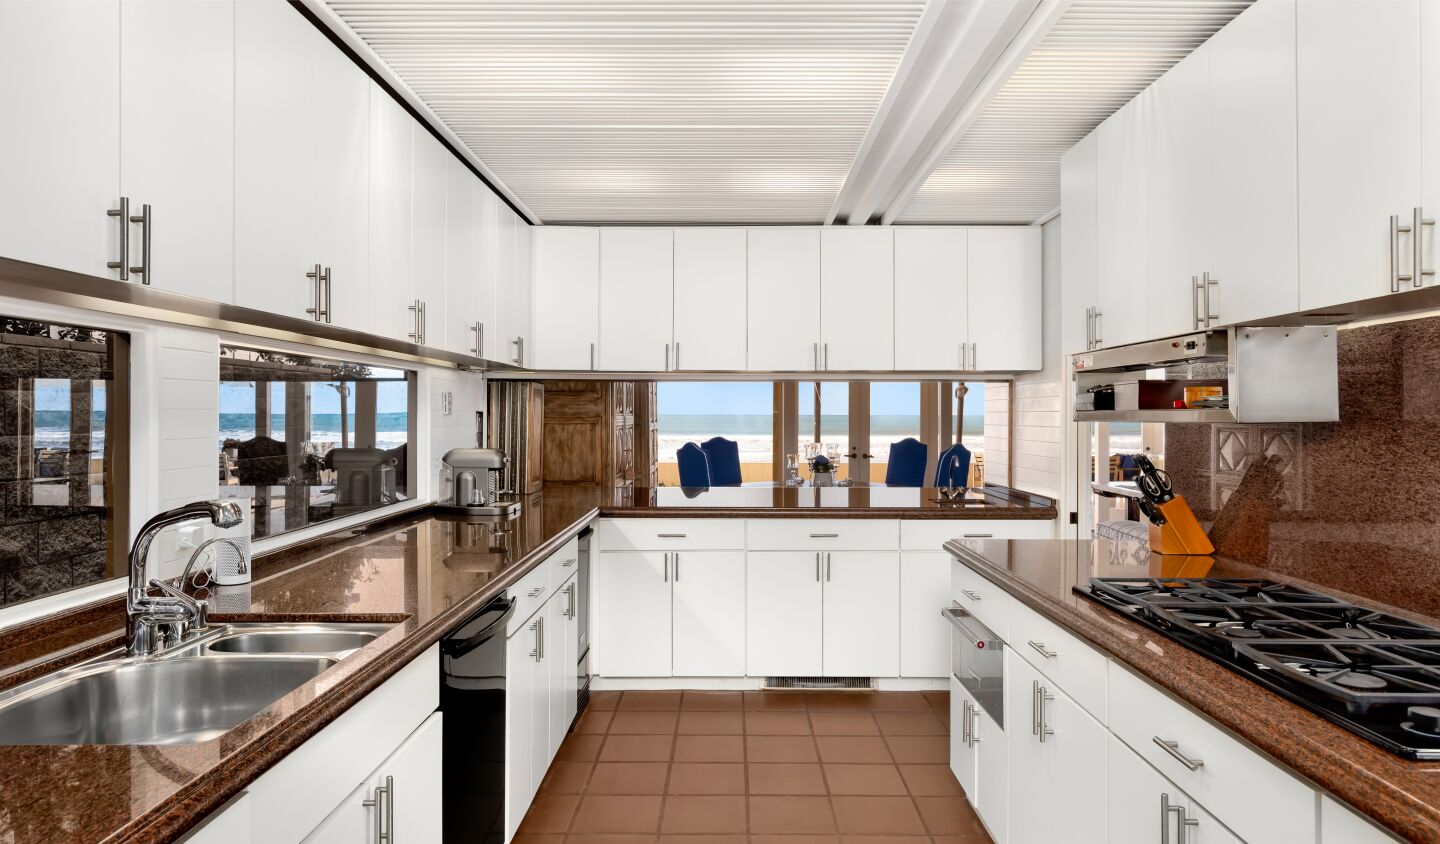 The galley-style kitchen.